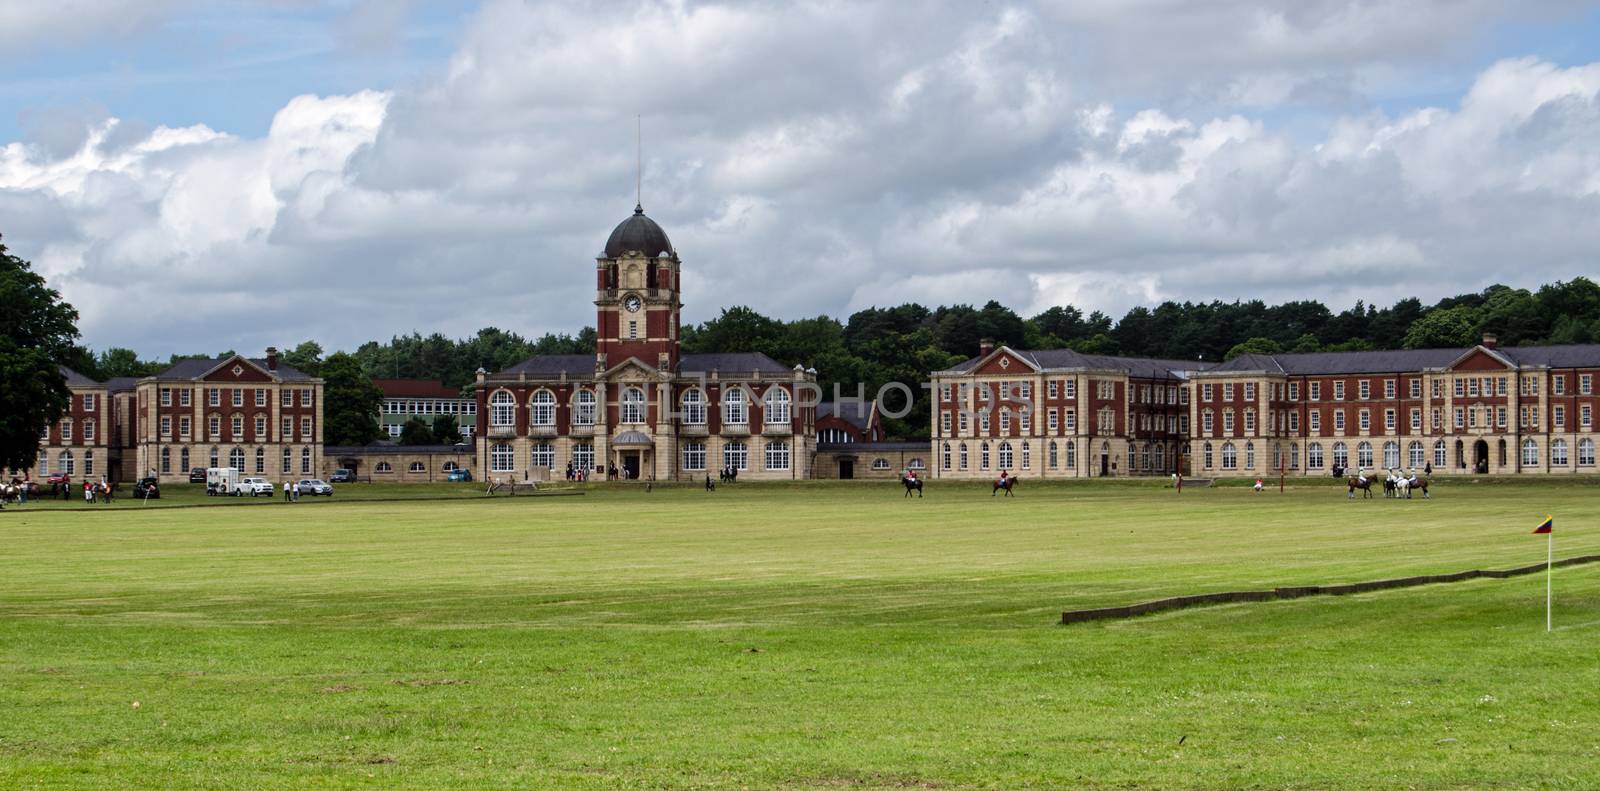 Horses and players preparing for a match on the polo field in front of New College at the Royal Military Academy, Sandhurst.  The Academy trains officers for the British Army.